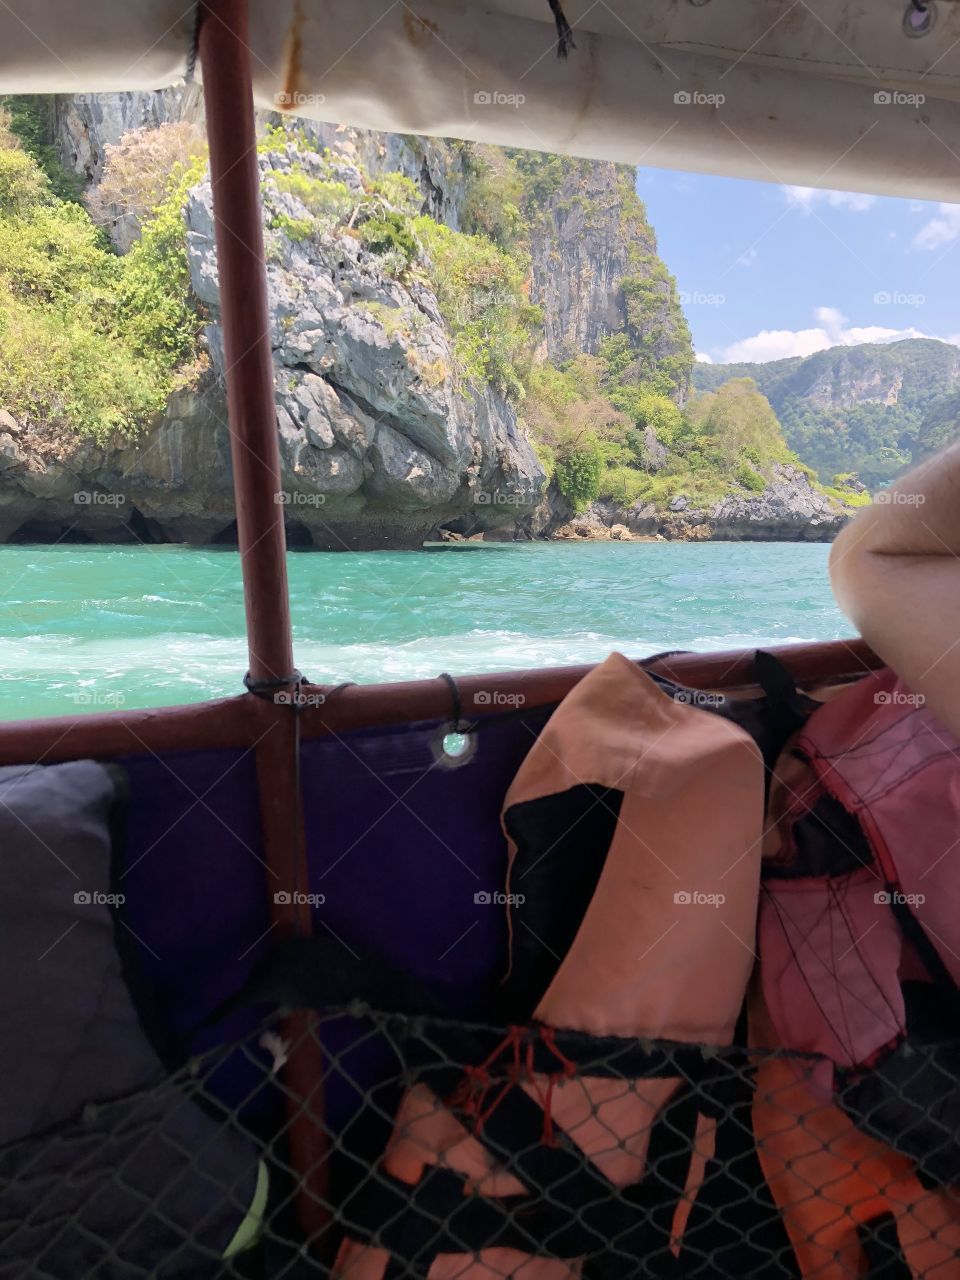 On a booze cruise on our way to Maya Beach in the Phi Phi Islands of Thailand. This is the beach where they shot the movie “The Beach” with Leo DiCaprio!